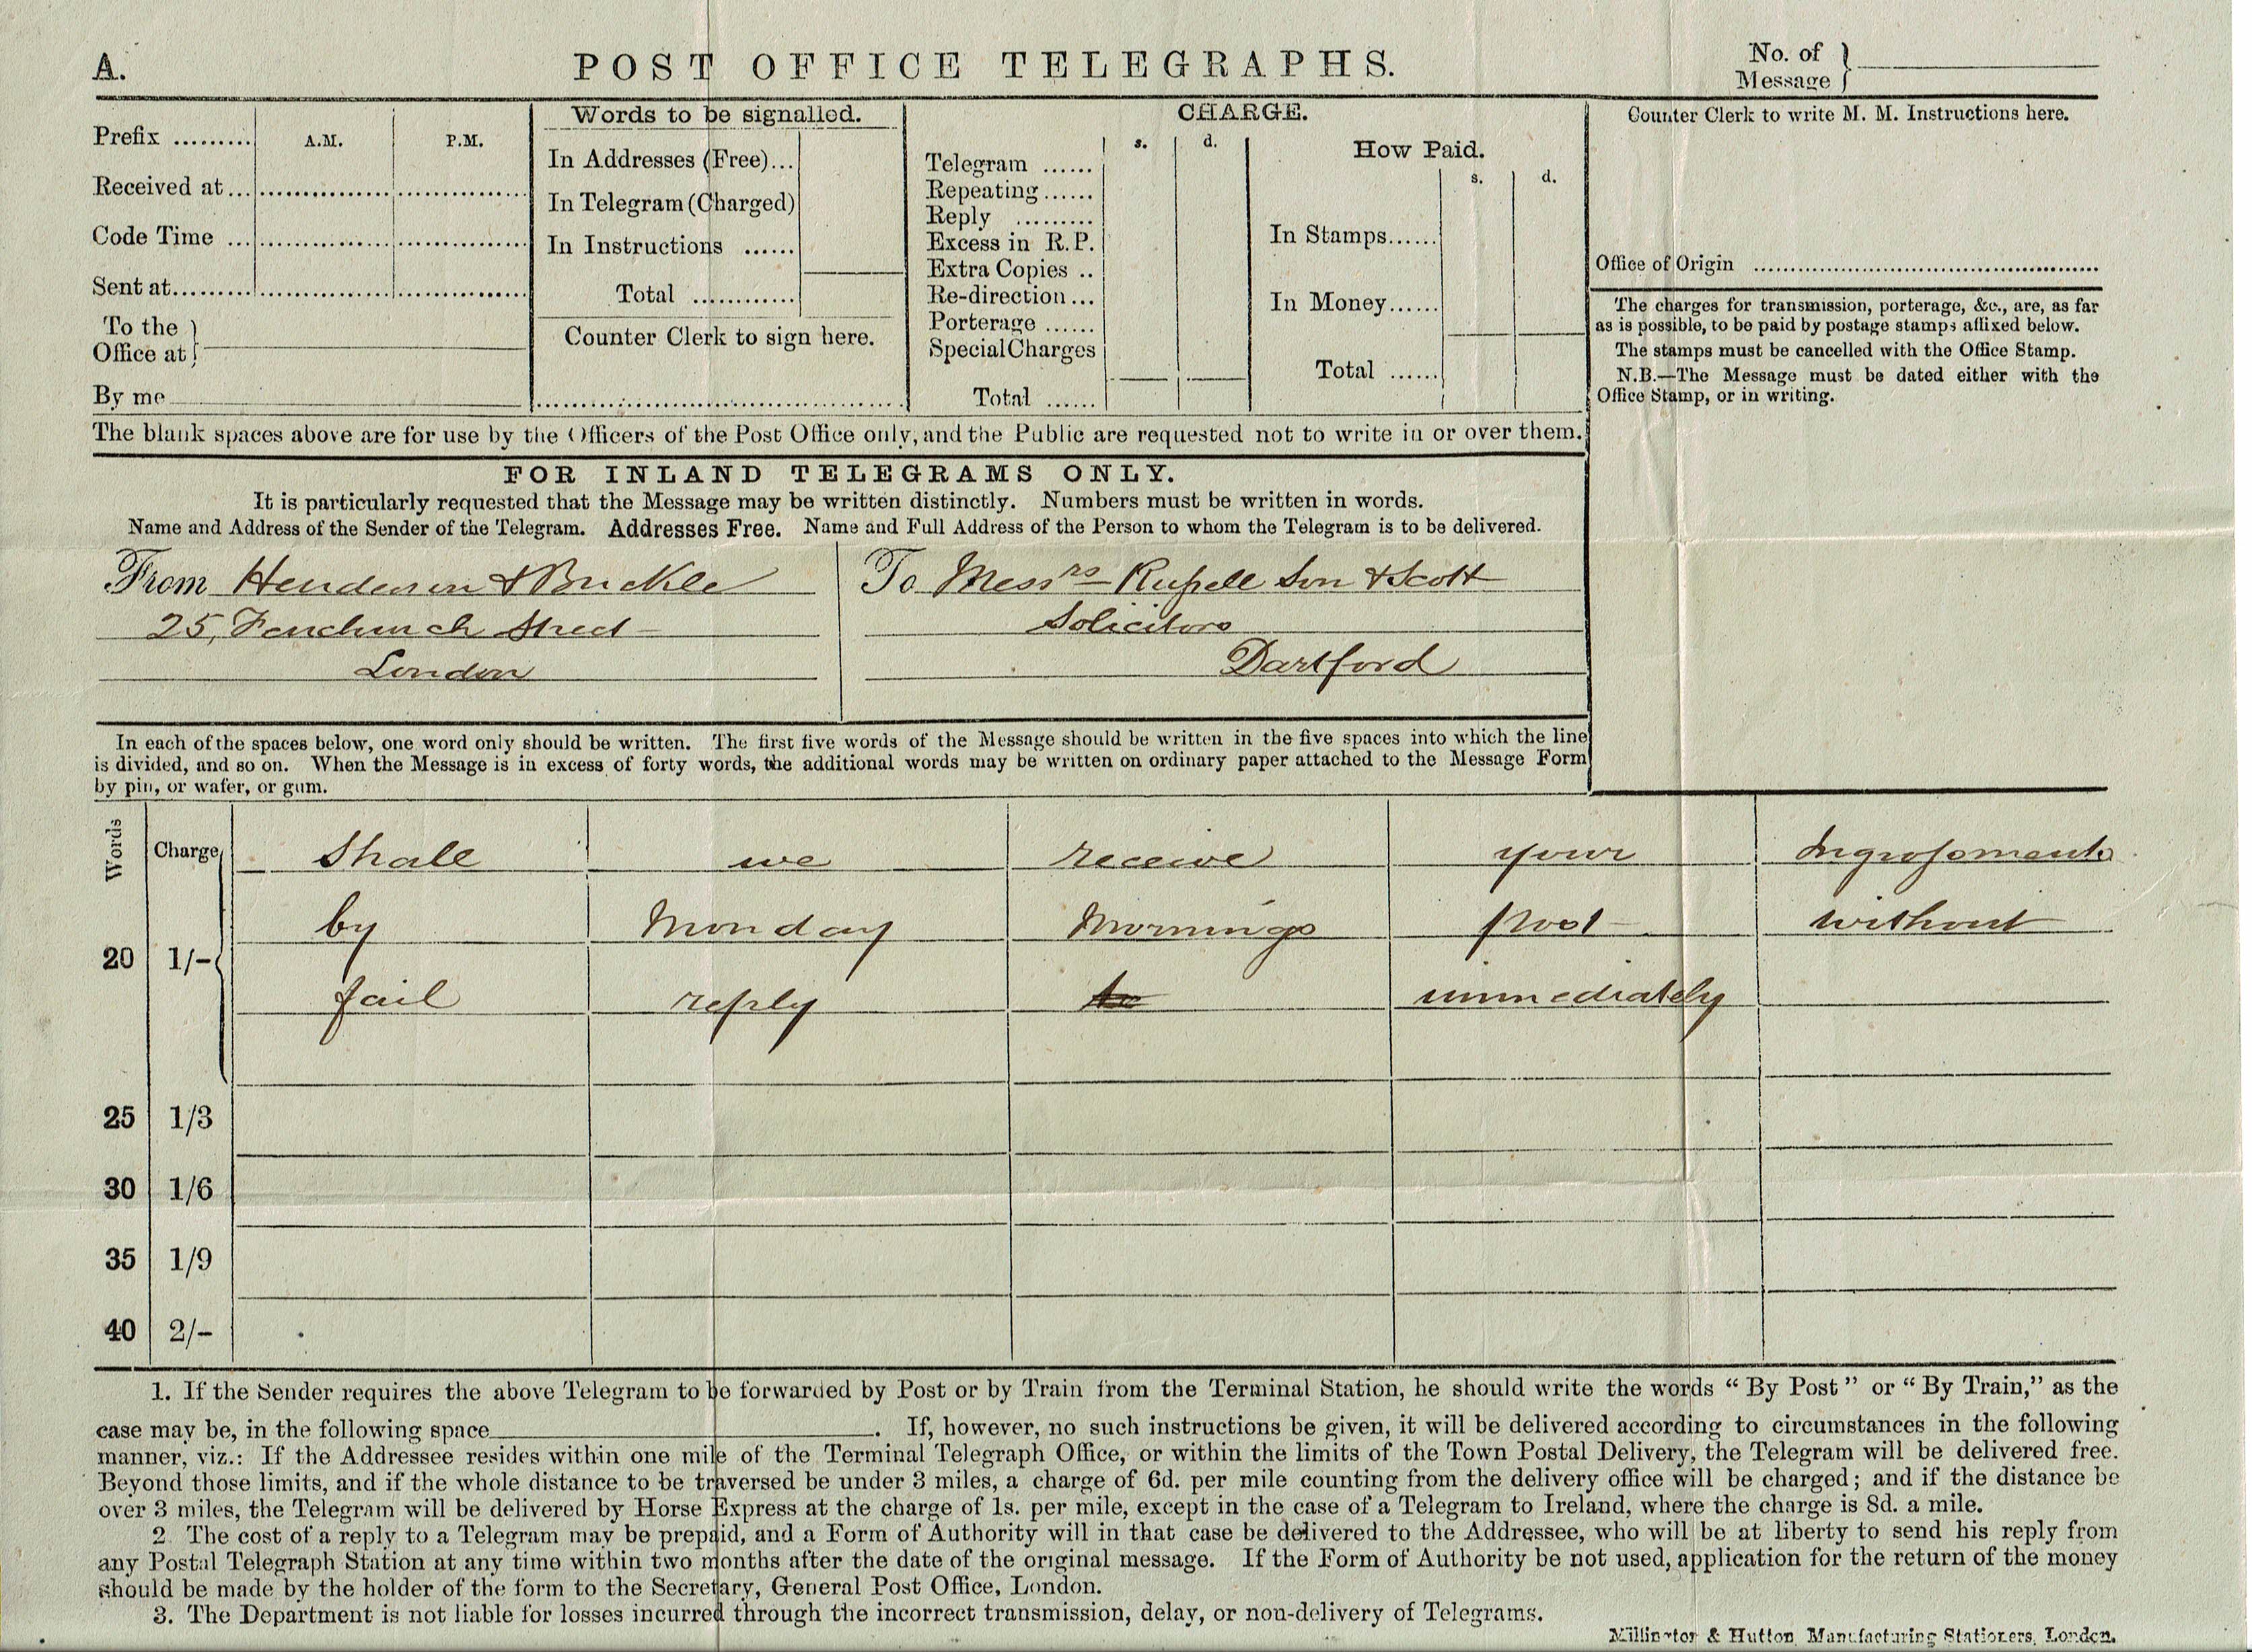 Large Forwarded Form - front